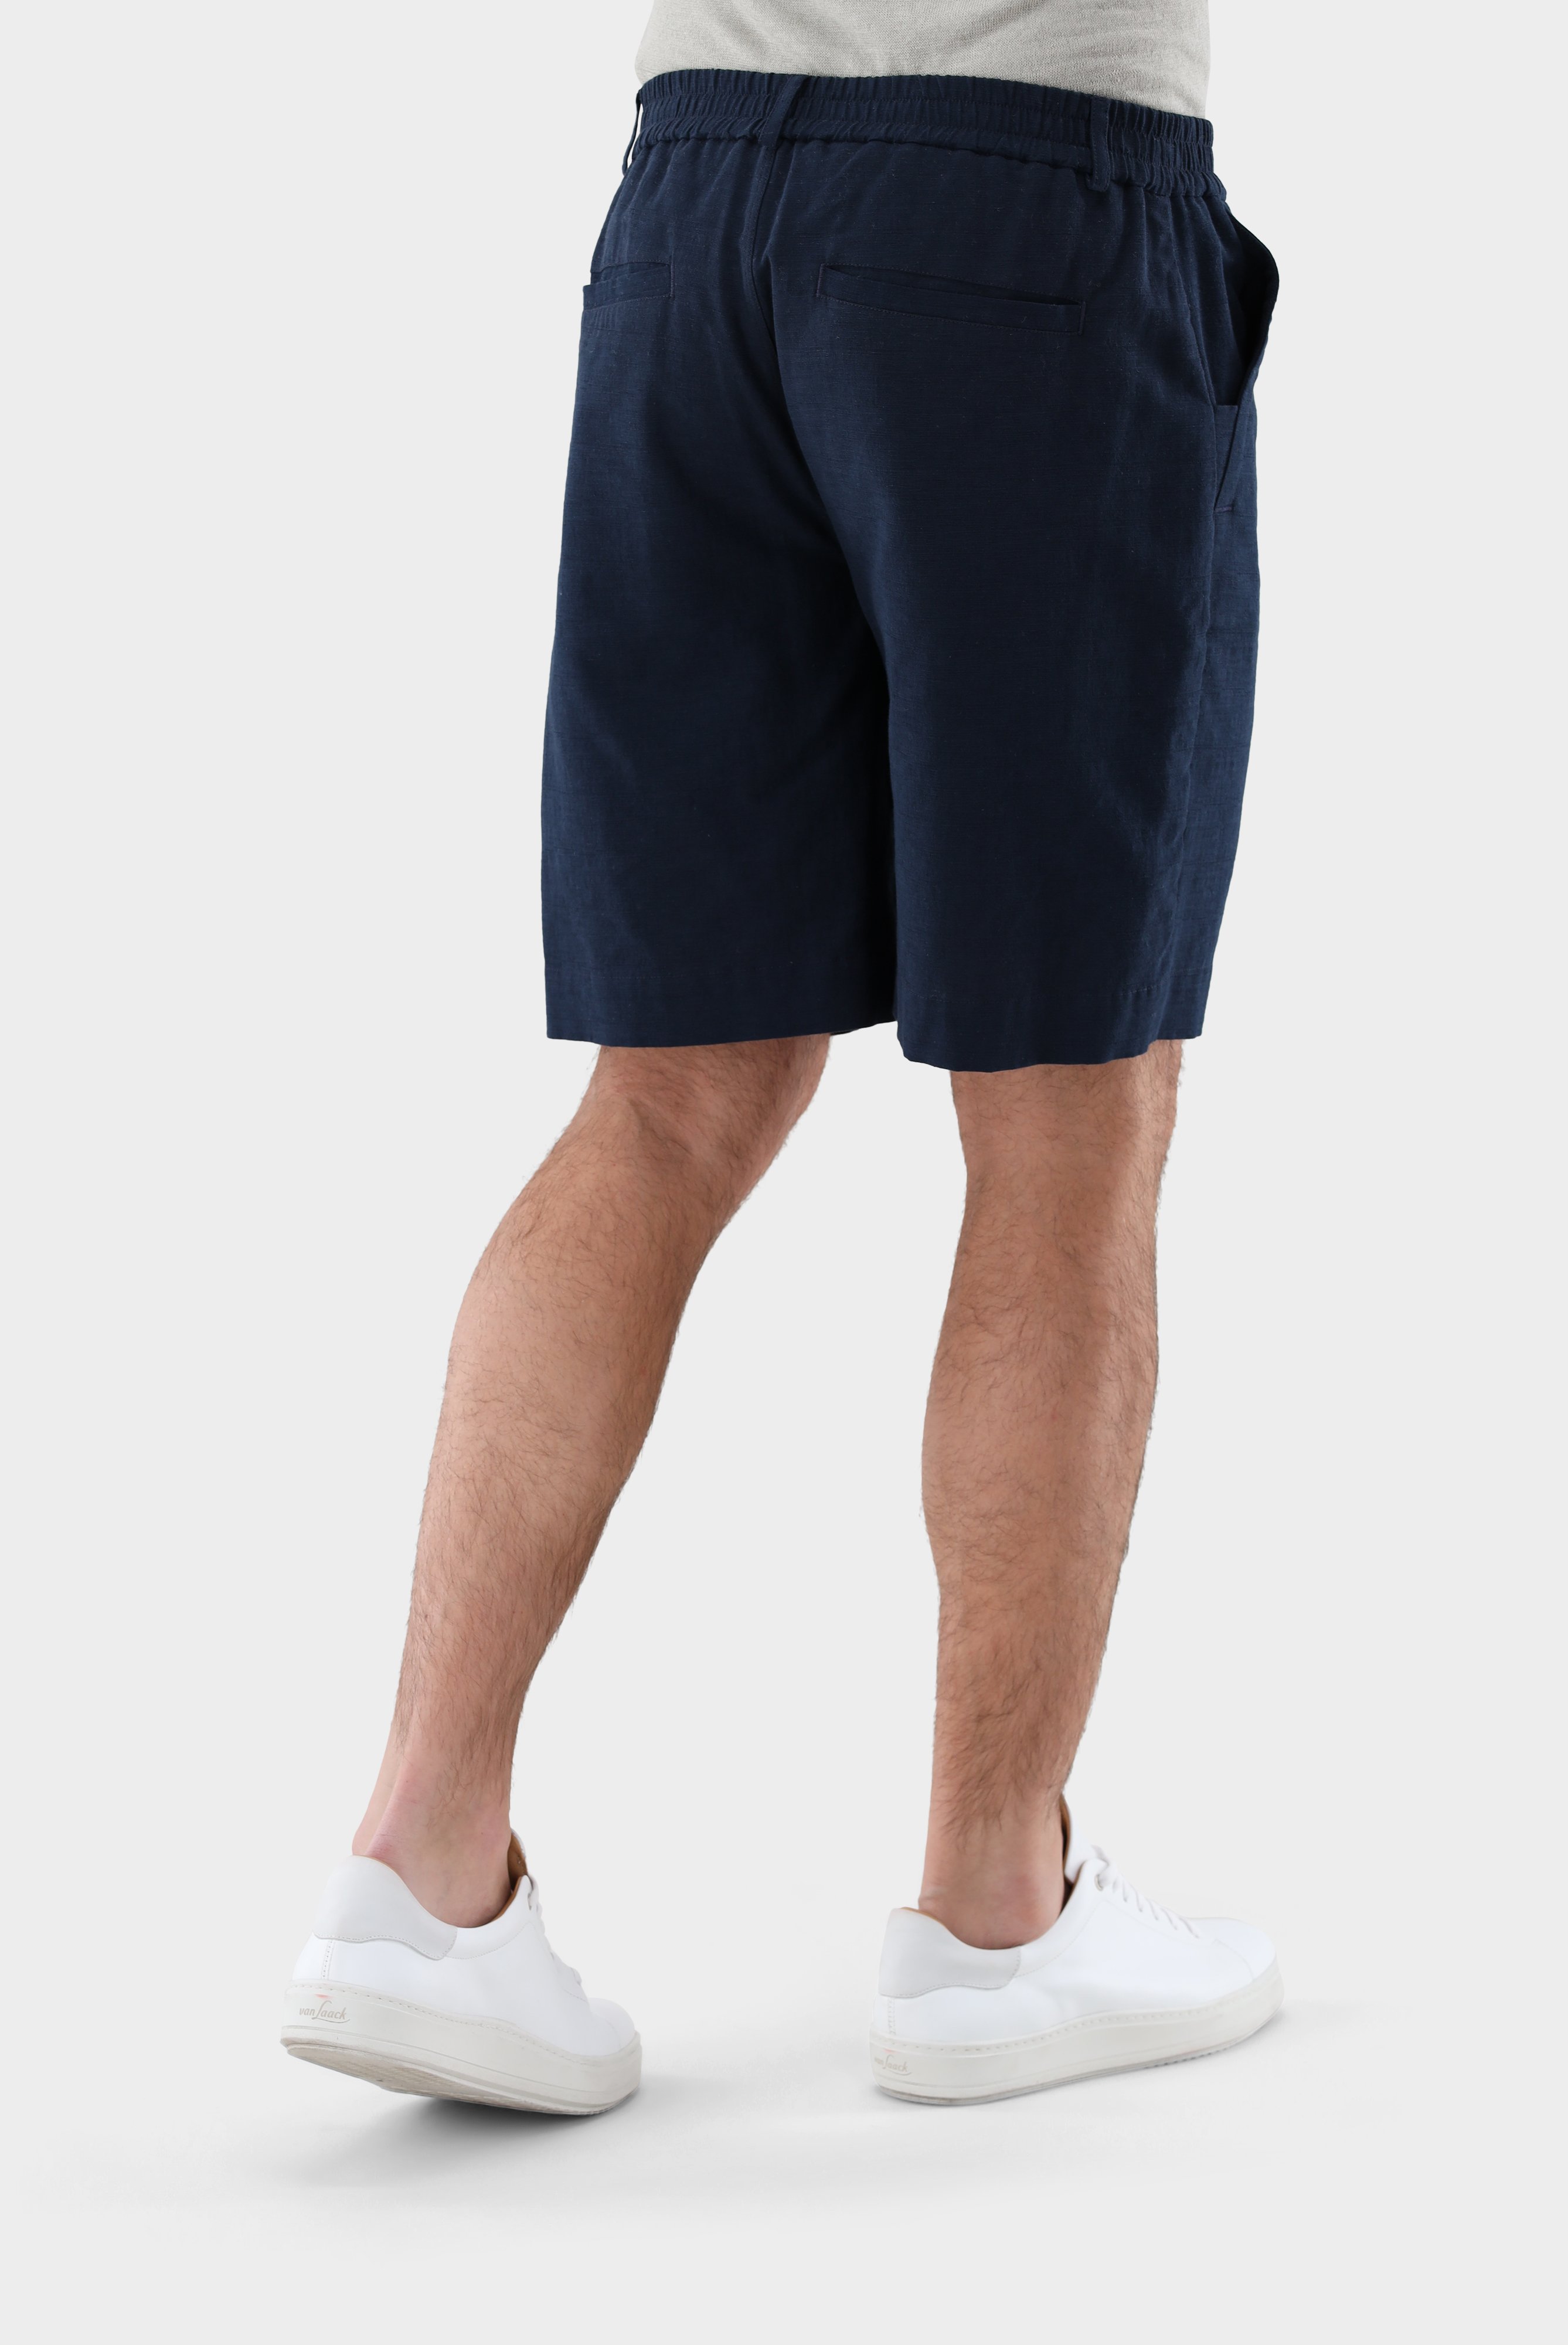 Jeans & Trousers+Casual Shorts with Jacquard Design+20.1218.S2.150252.790.46